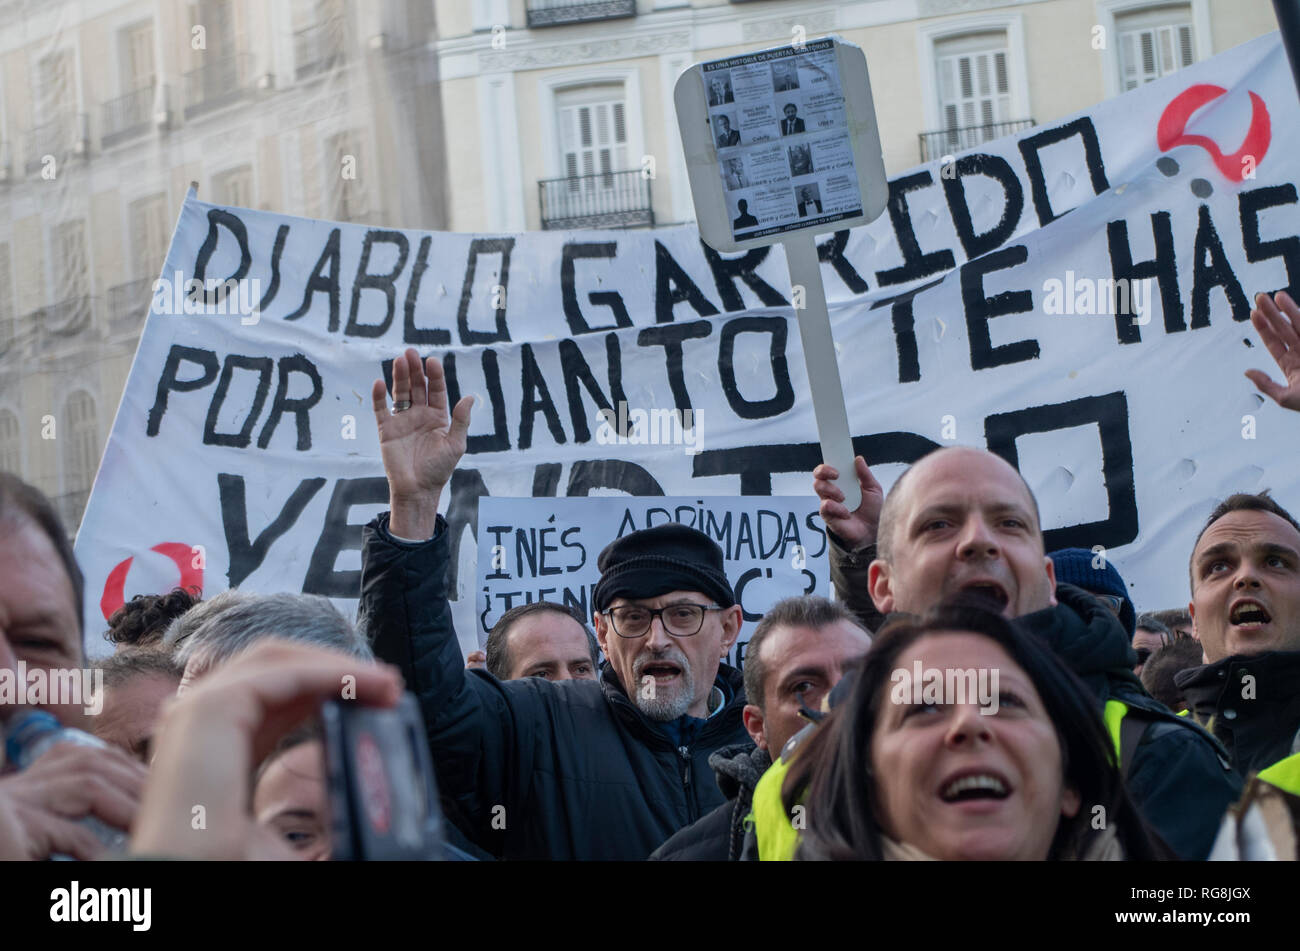 Madrid, Spain. 28th January 2019. Taxi drivers in Madrid have been on a strike for more than a week demanding the prohibition of Uber and Cabify in the Spanish capital-city.   Due to a lack of agreement, hundreds of taxi drivers protested at Puerta del Sol, Madrid’s central square.  In the picture a taxi driver is raising his hand in a gesture of protest. Credit: Lora Grigorova/Alamy Live News Stock Photo